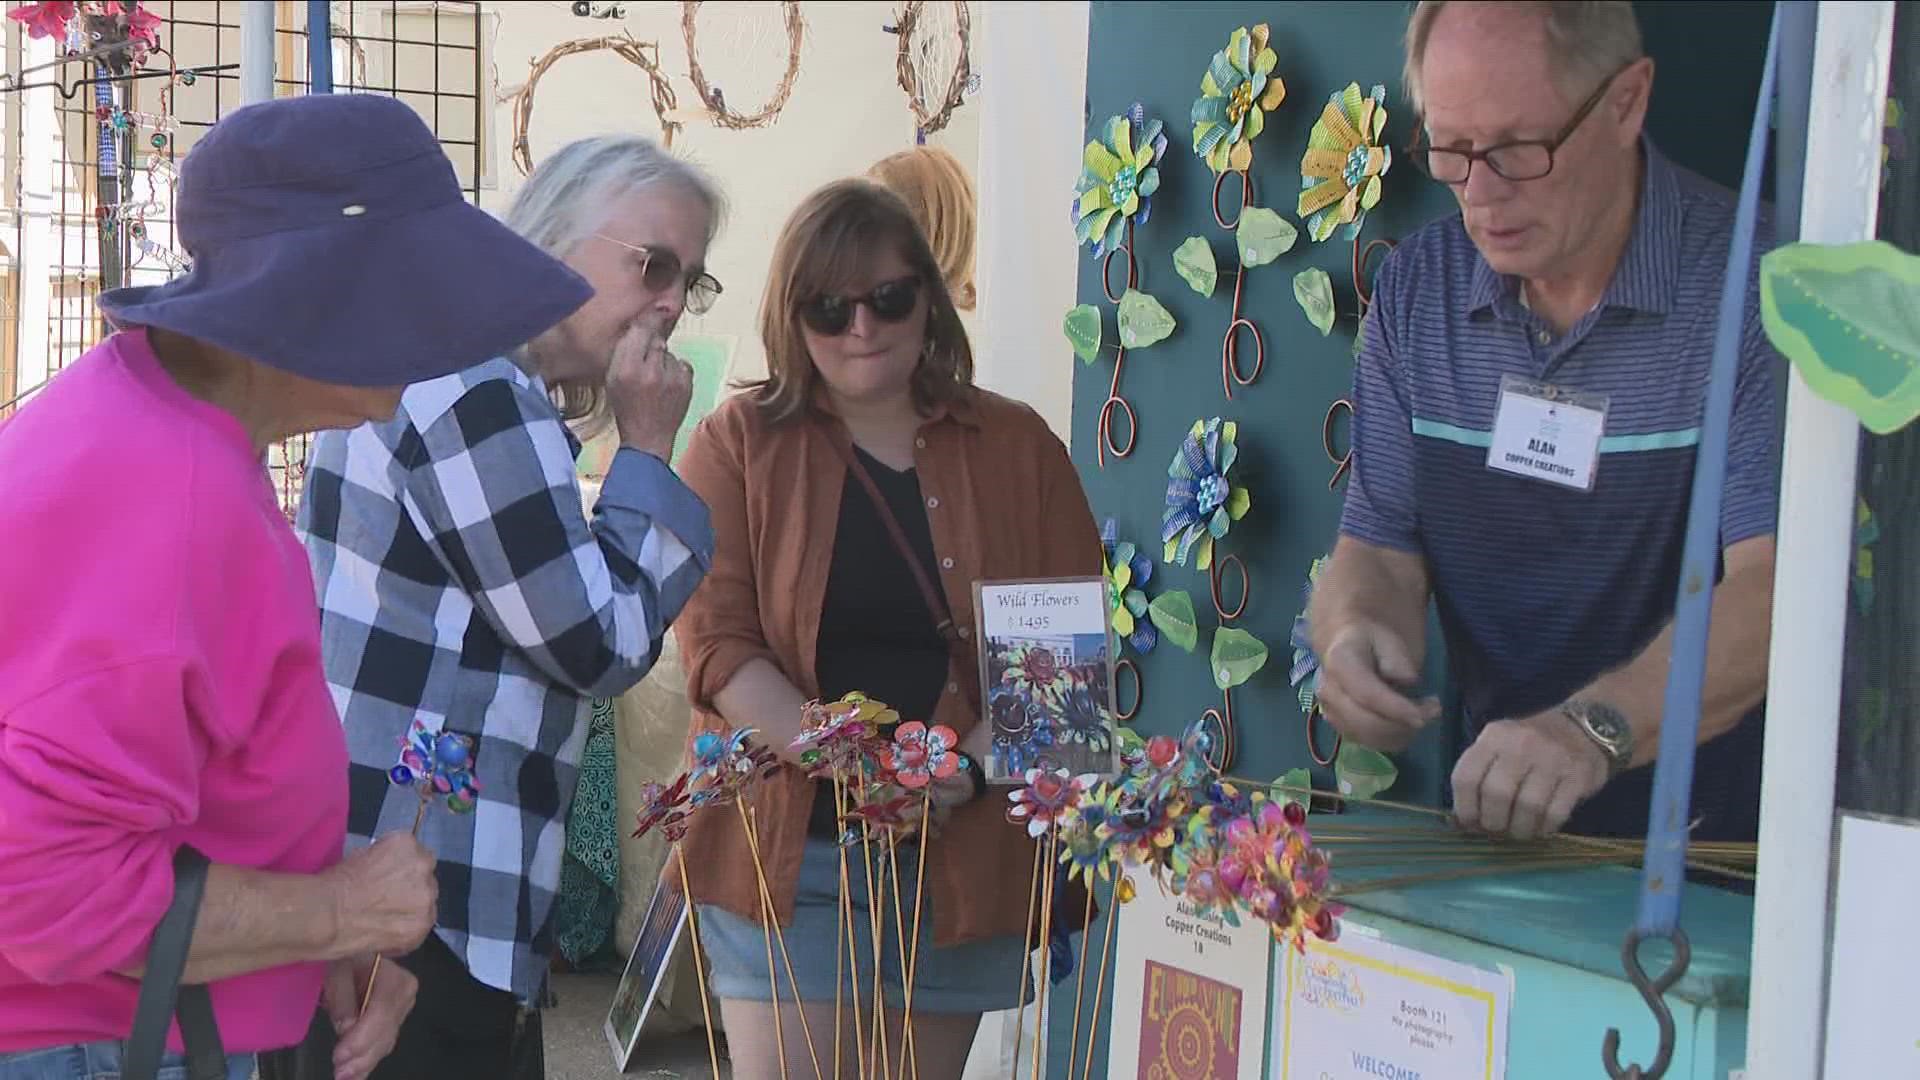 Elmwood Avenue Festival of the Arts takes place this weekend